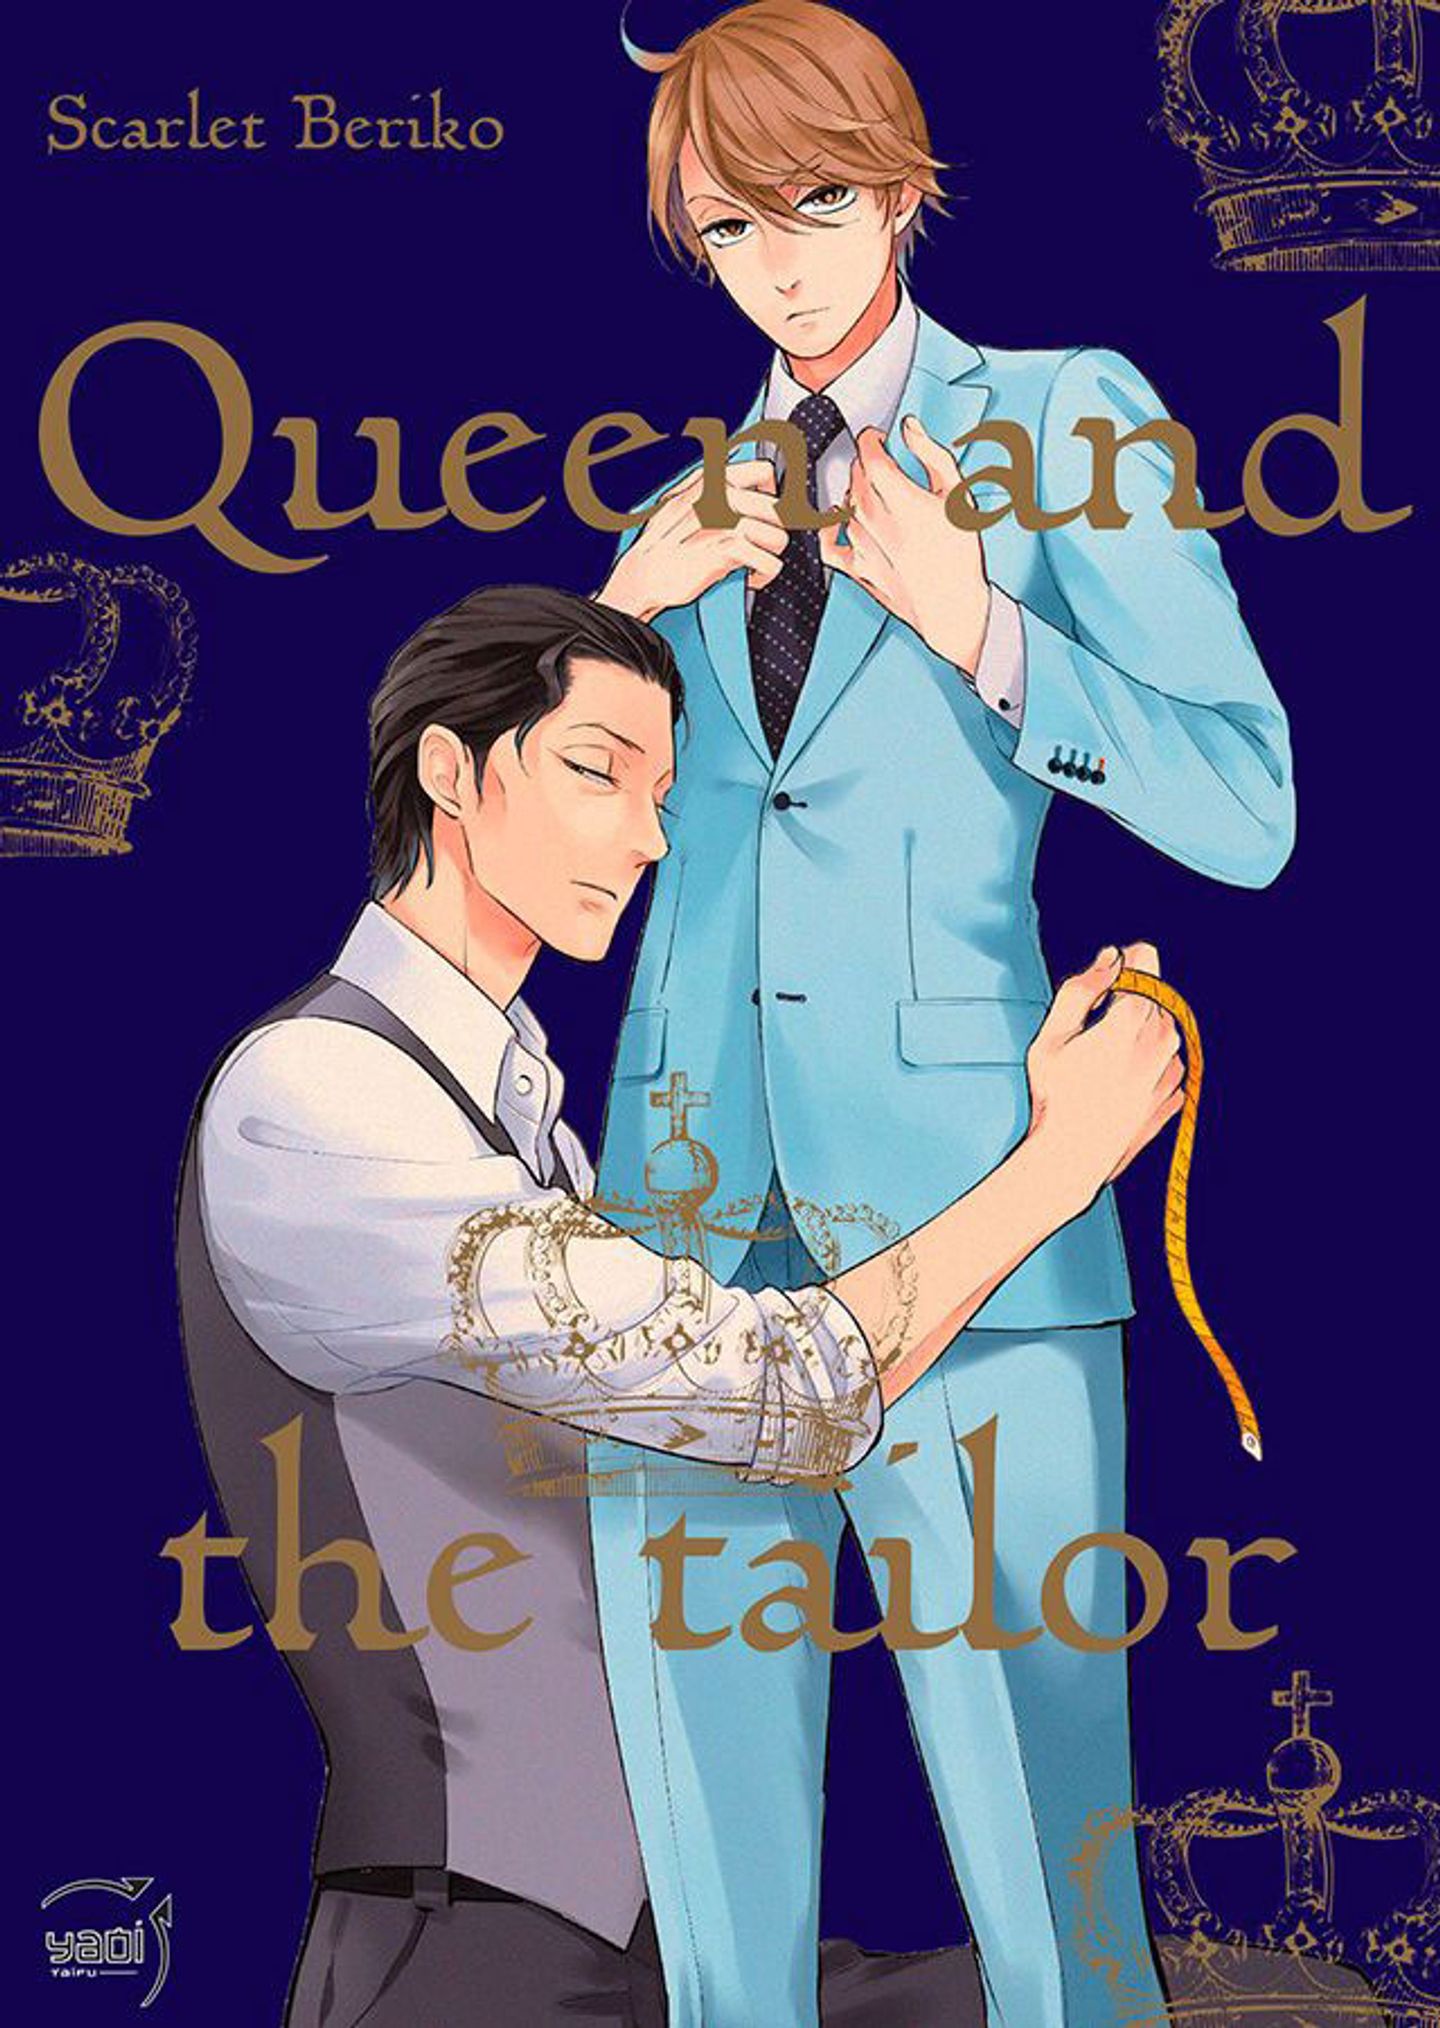 Queen and the tailor yaoi manga gay 